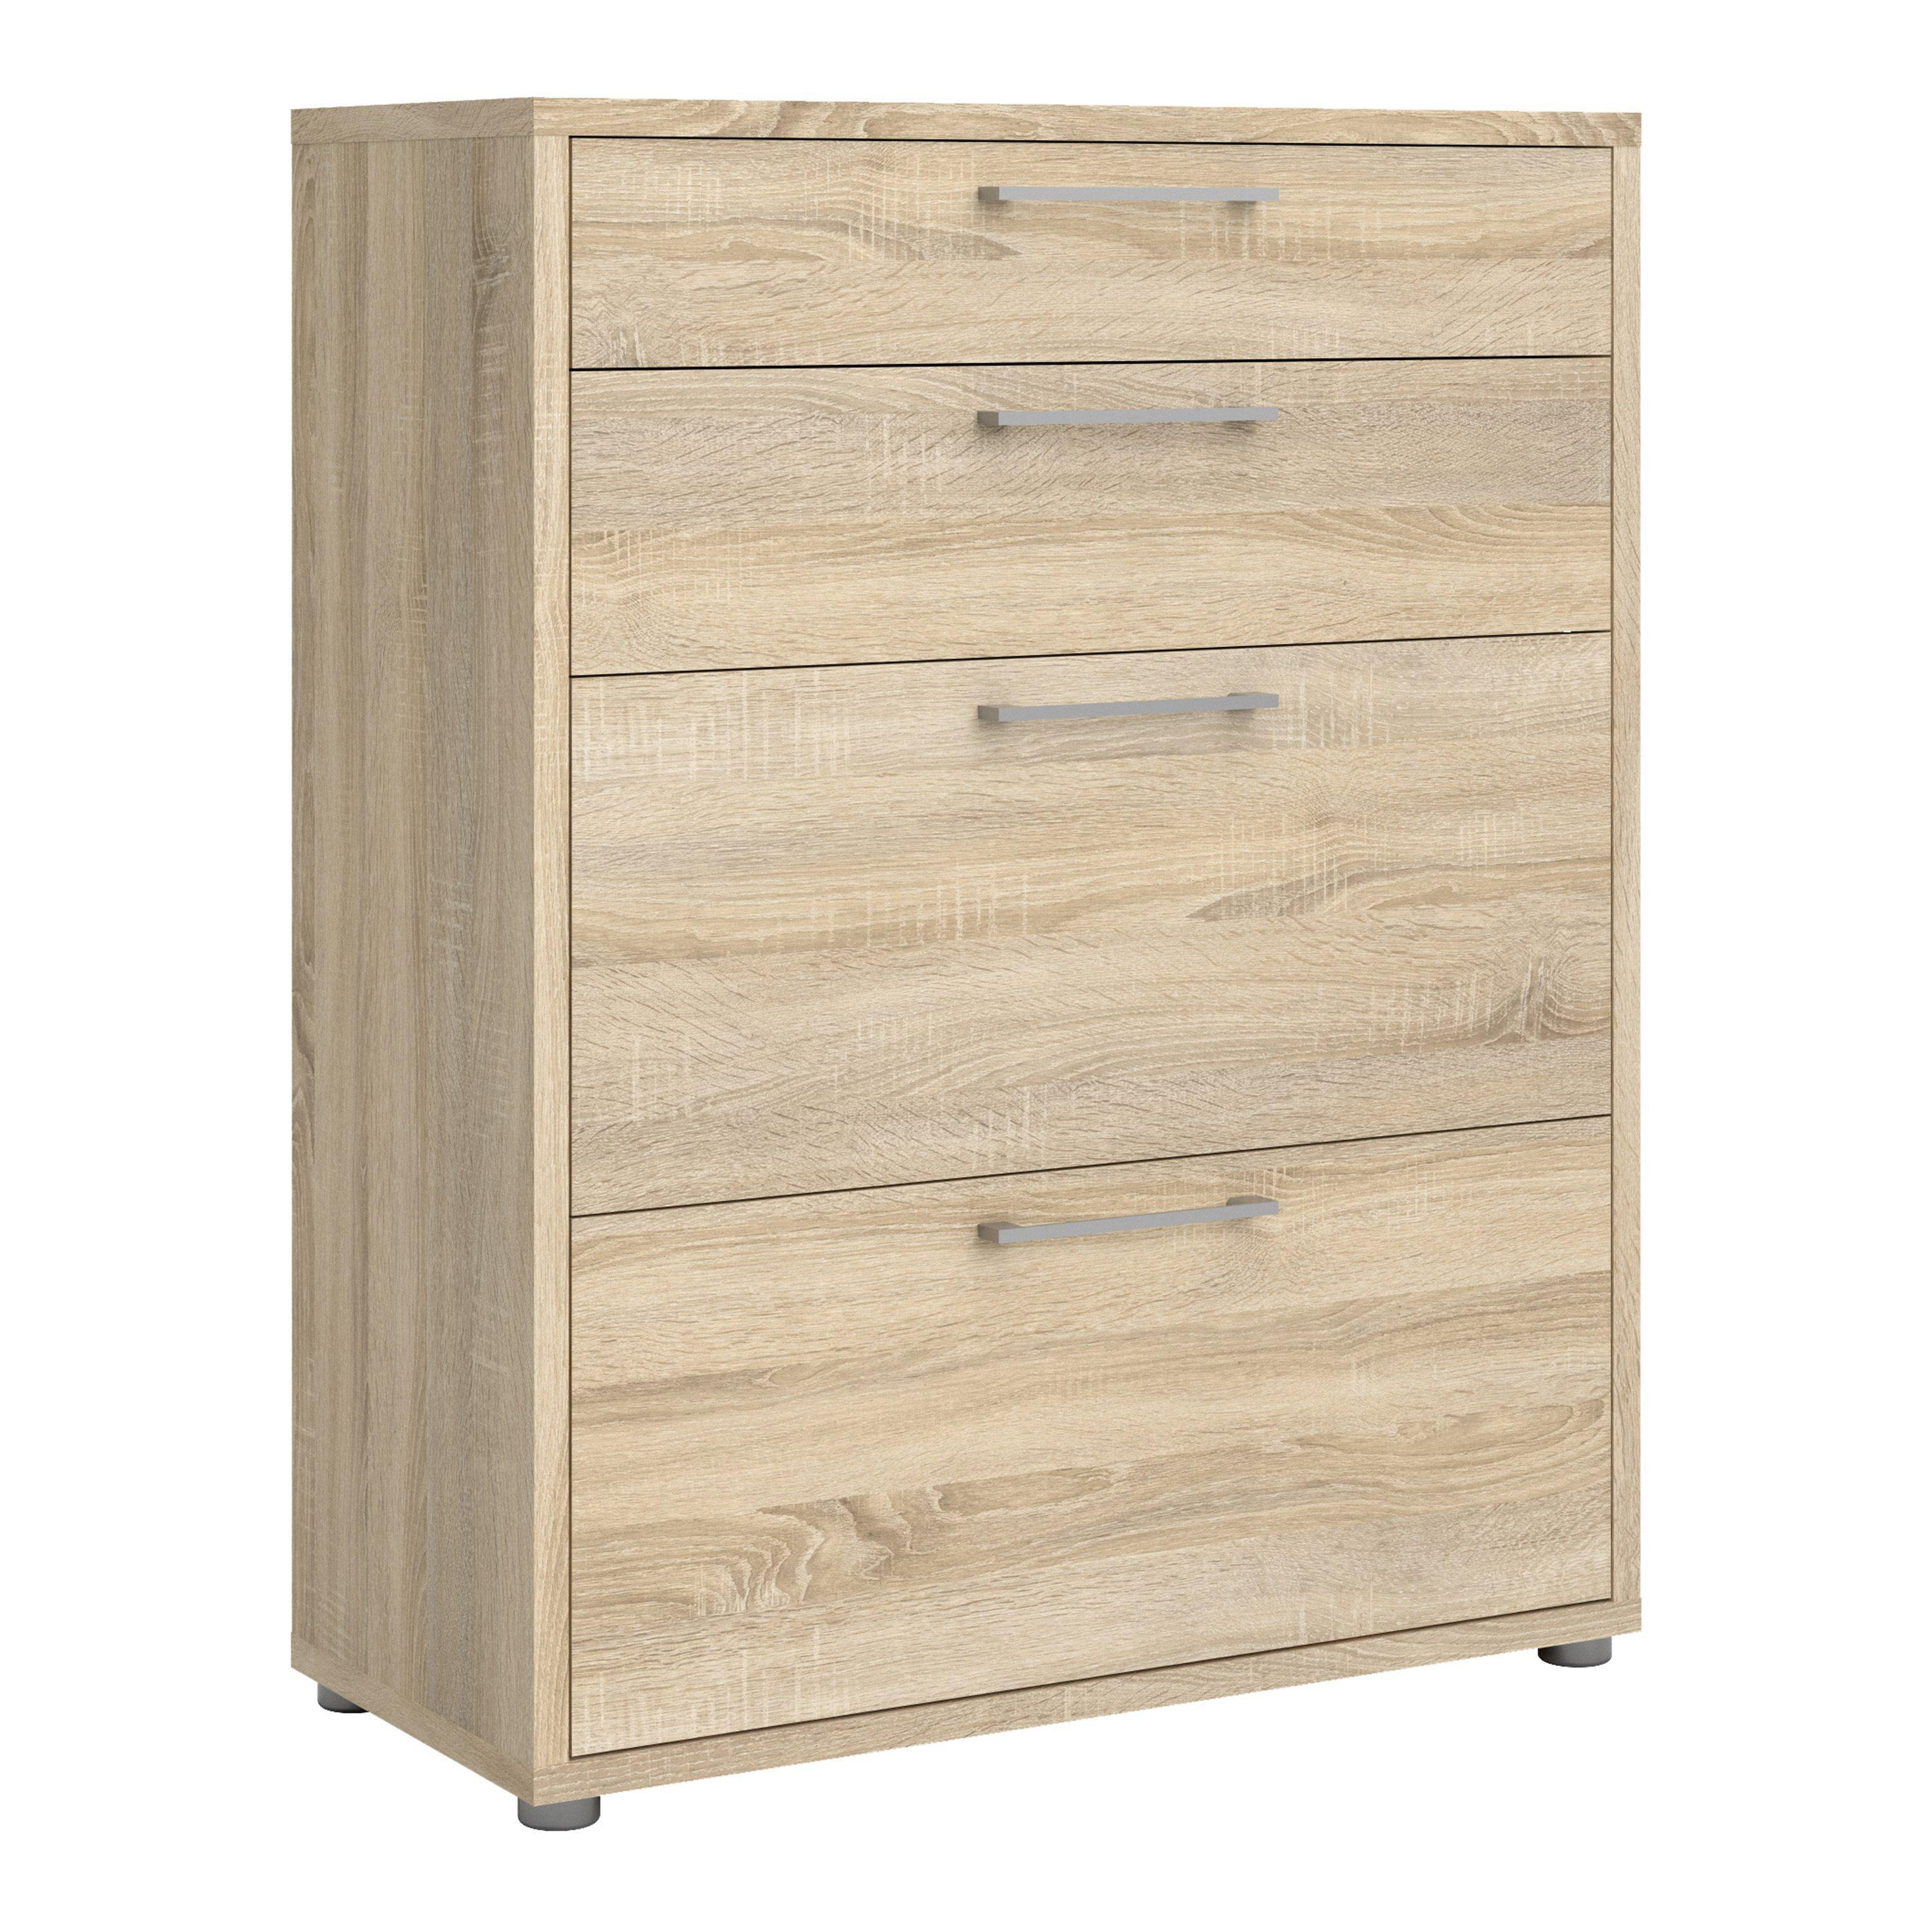 Prima Office Storage with 2 Drawers 2 File Drawers - image 1